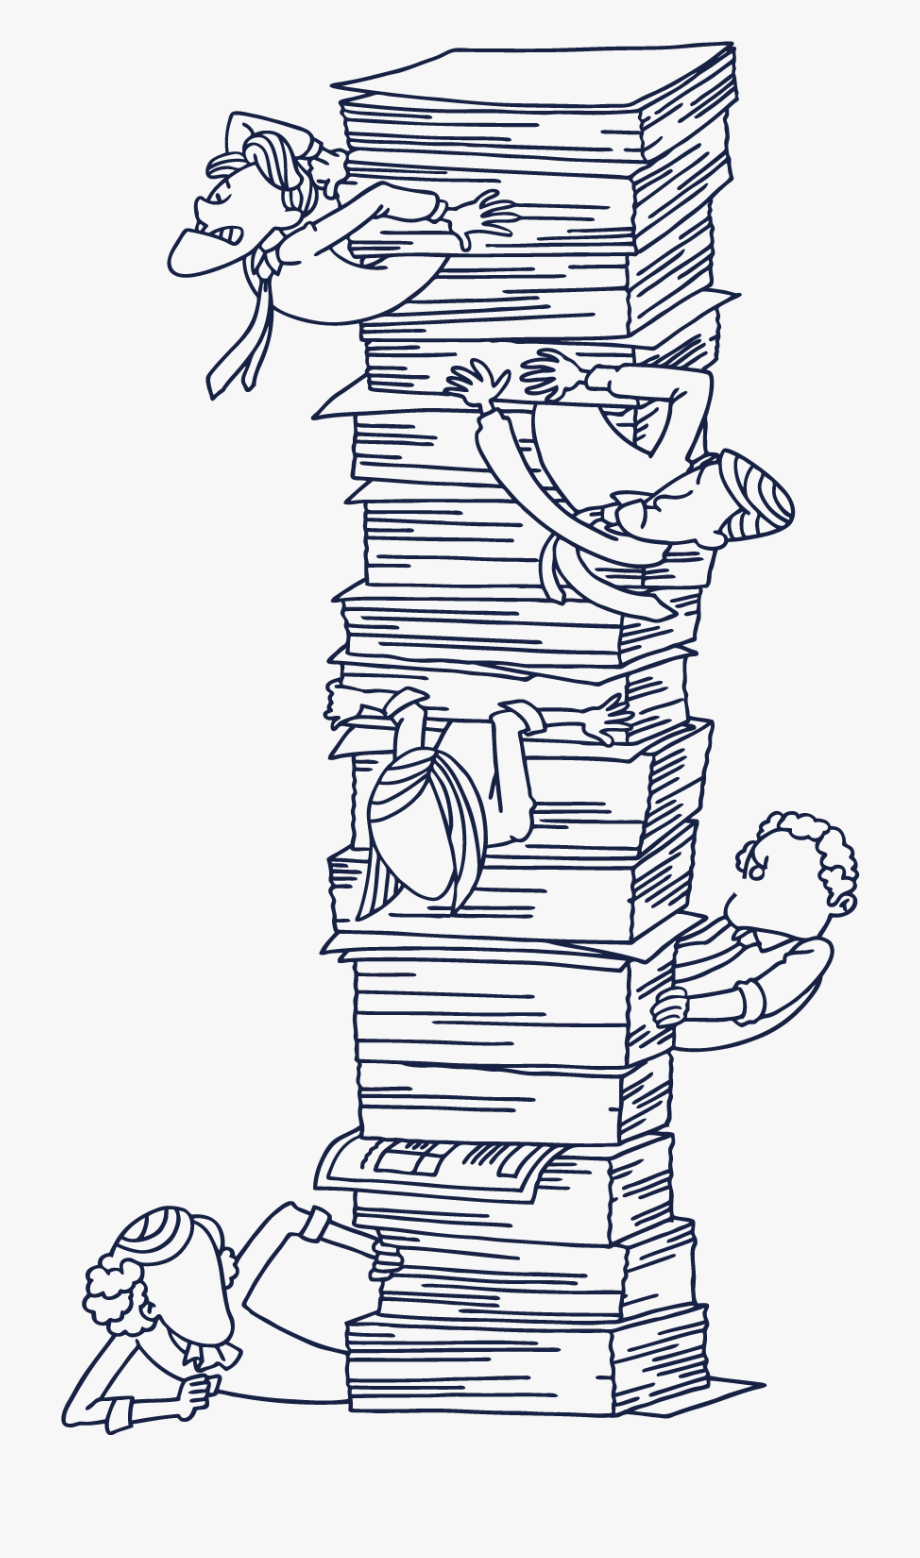 Clipart library library closed. Stack book cartoon transparent